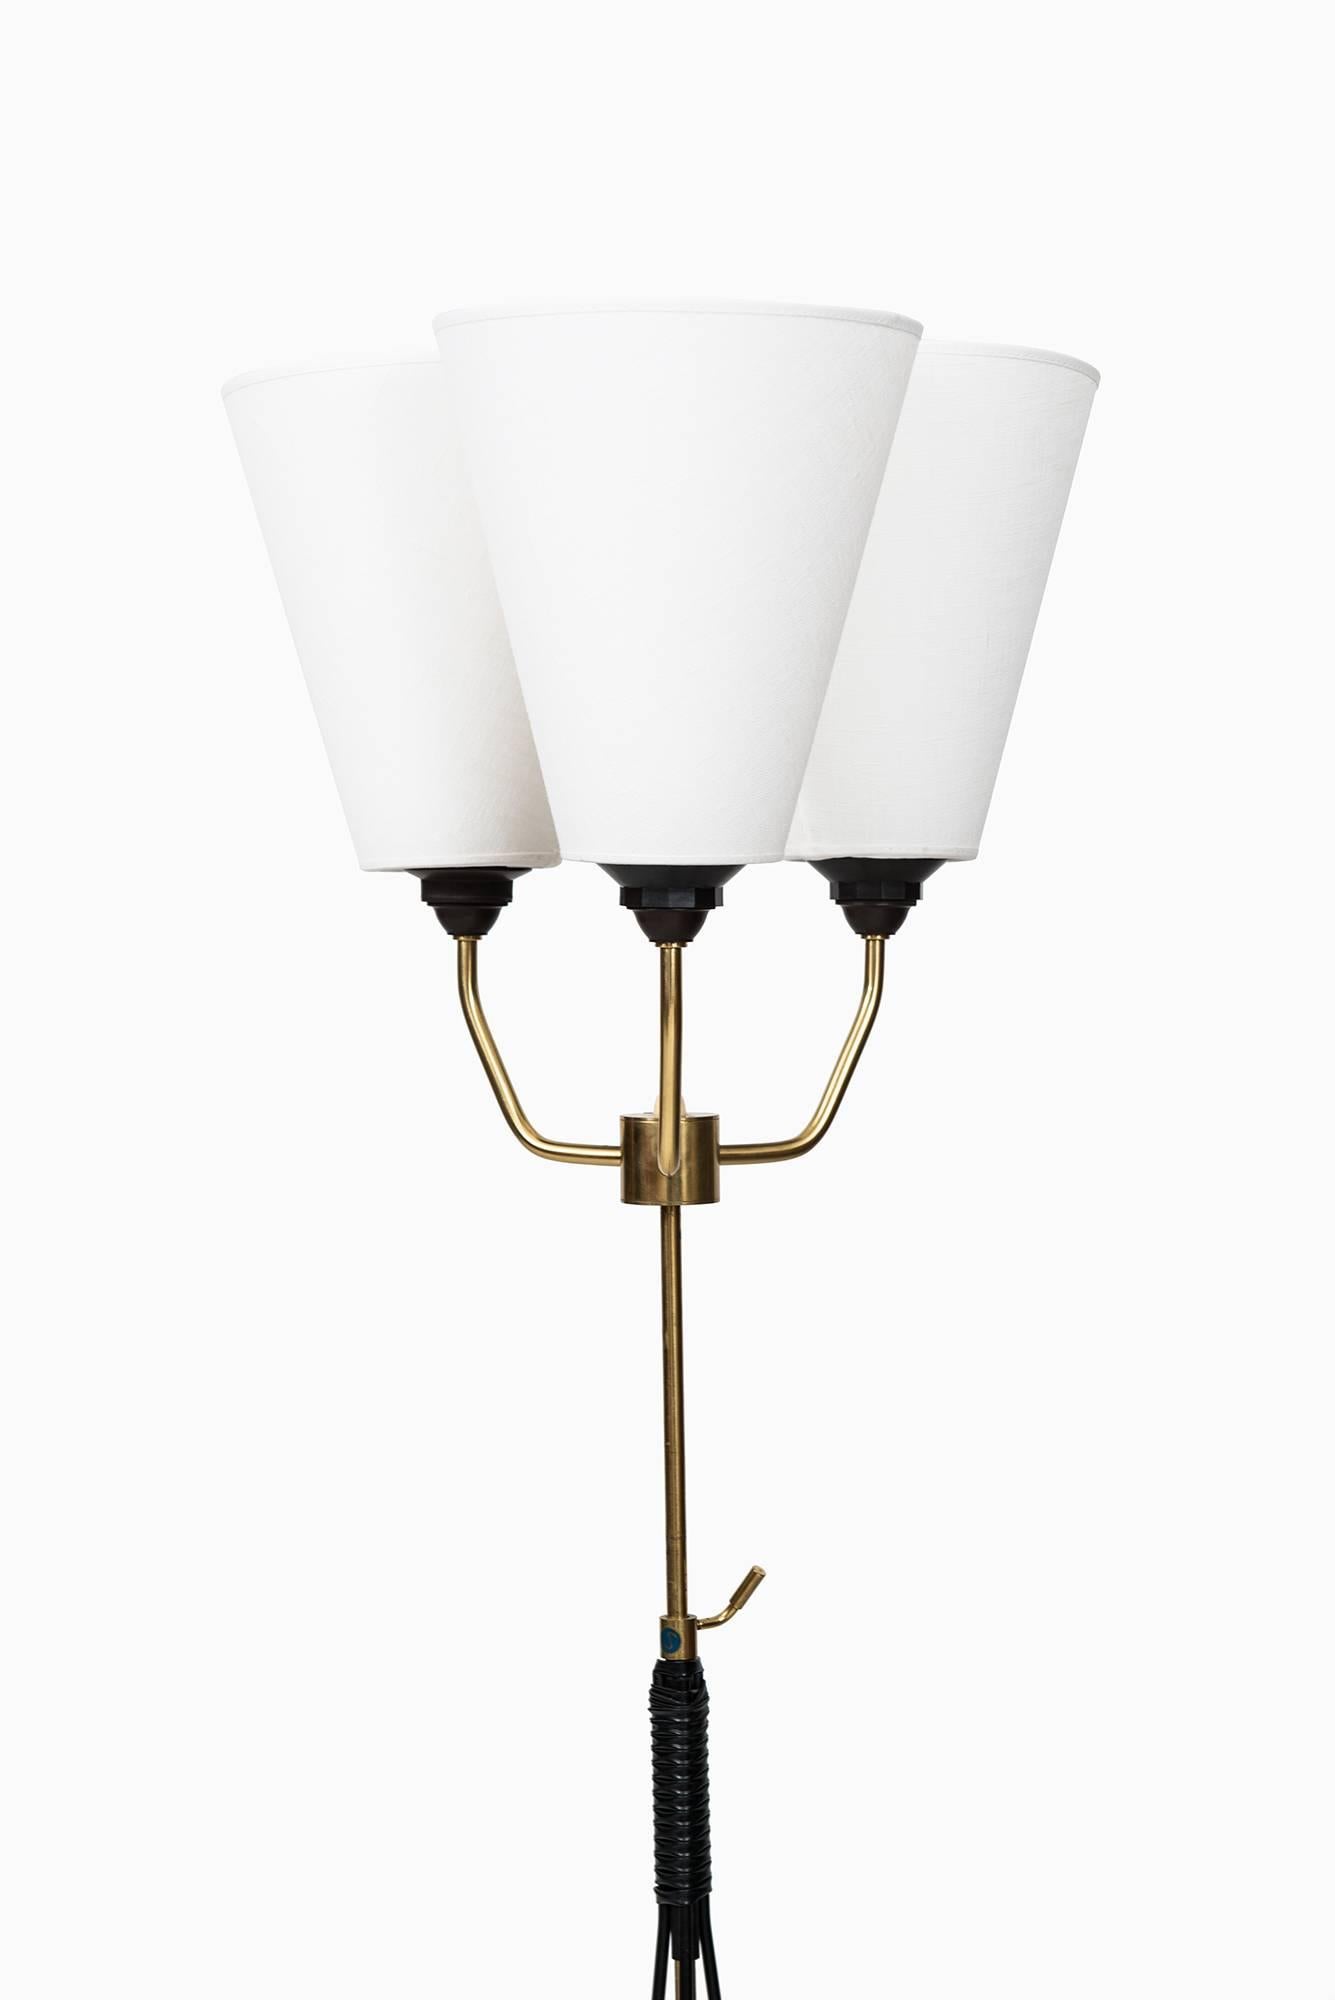 A pair of height adjustable uplights/floor lamps. Produced in Sweden.